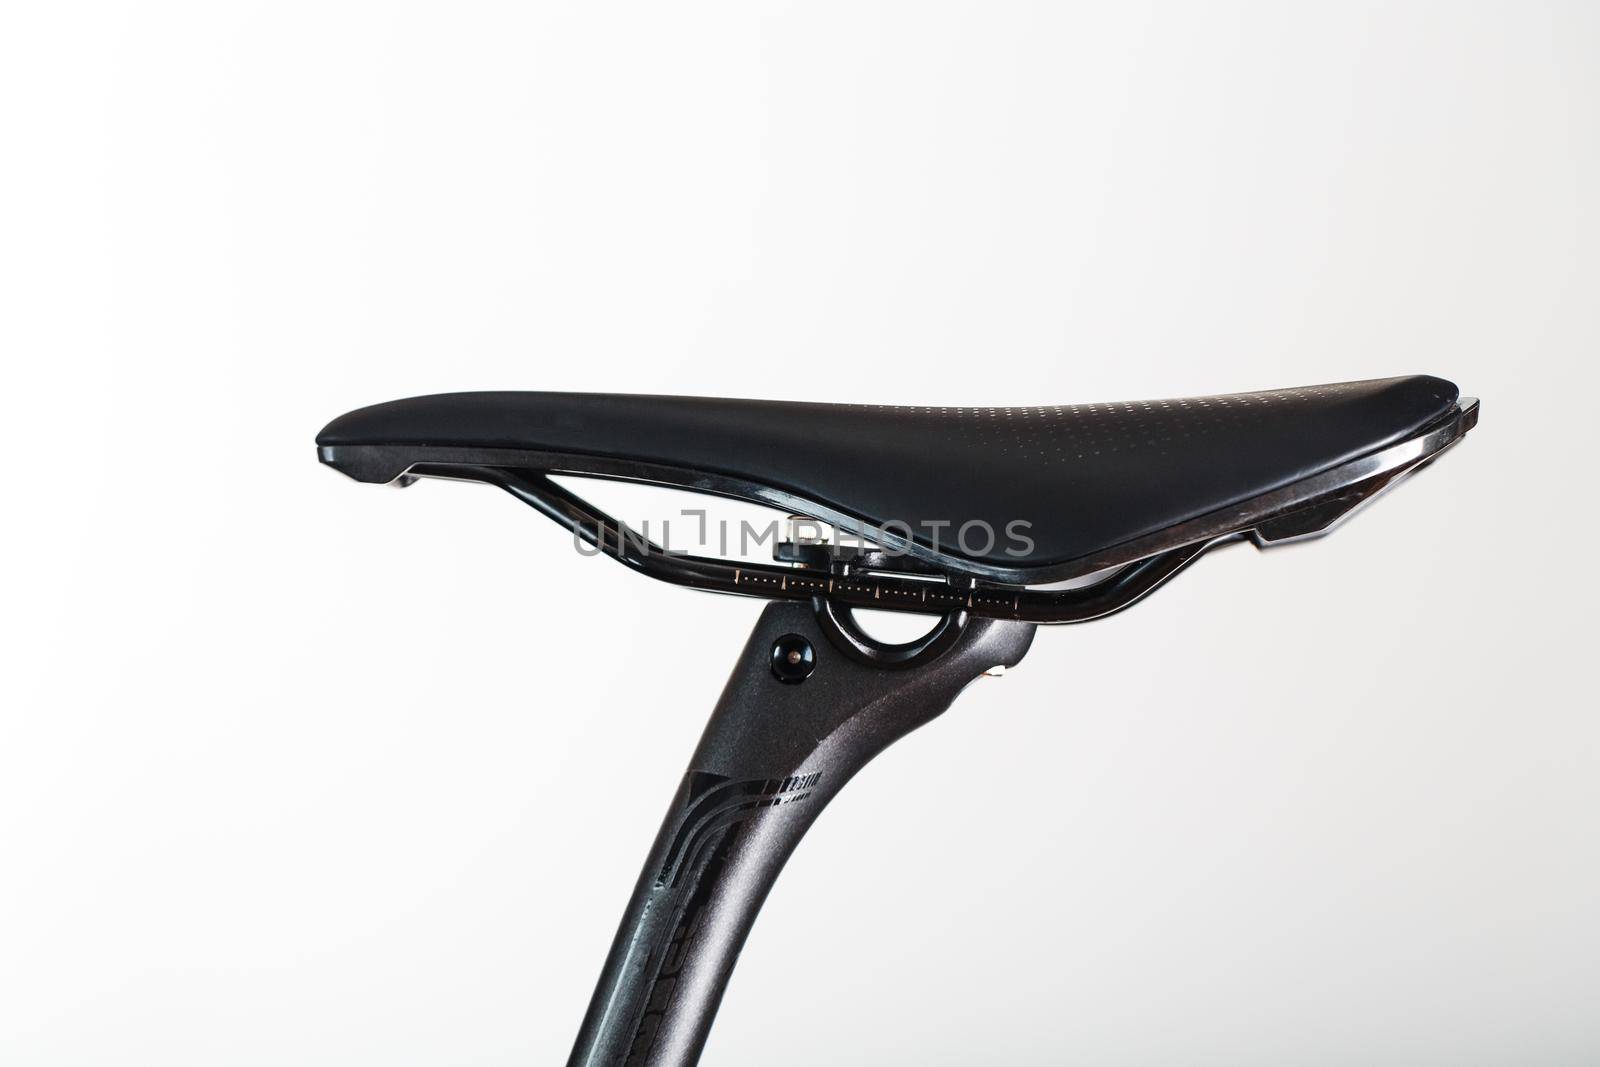 Bicycle saddle with seatpost on a light background accessories for bike repair and tuning